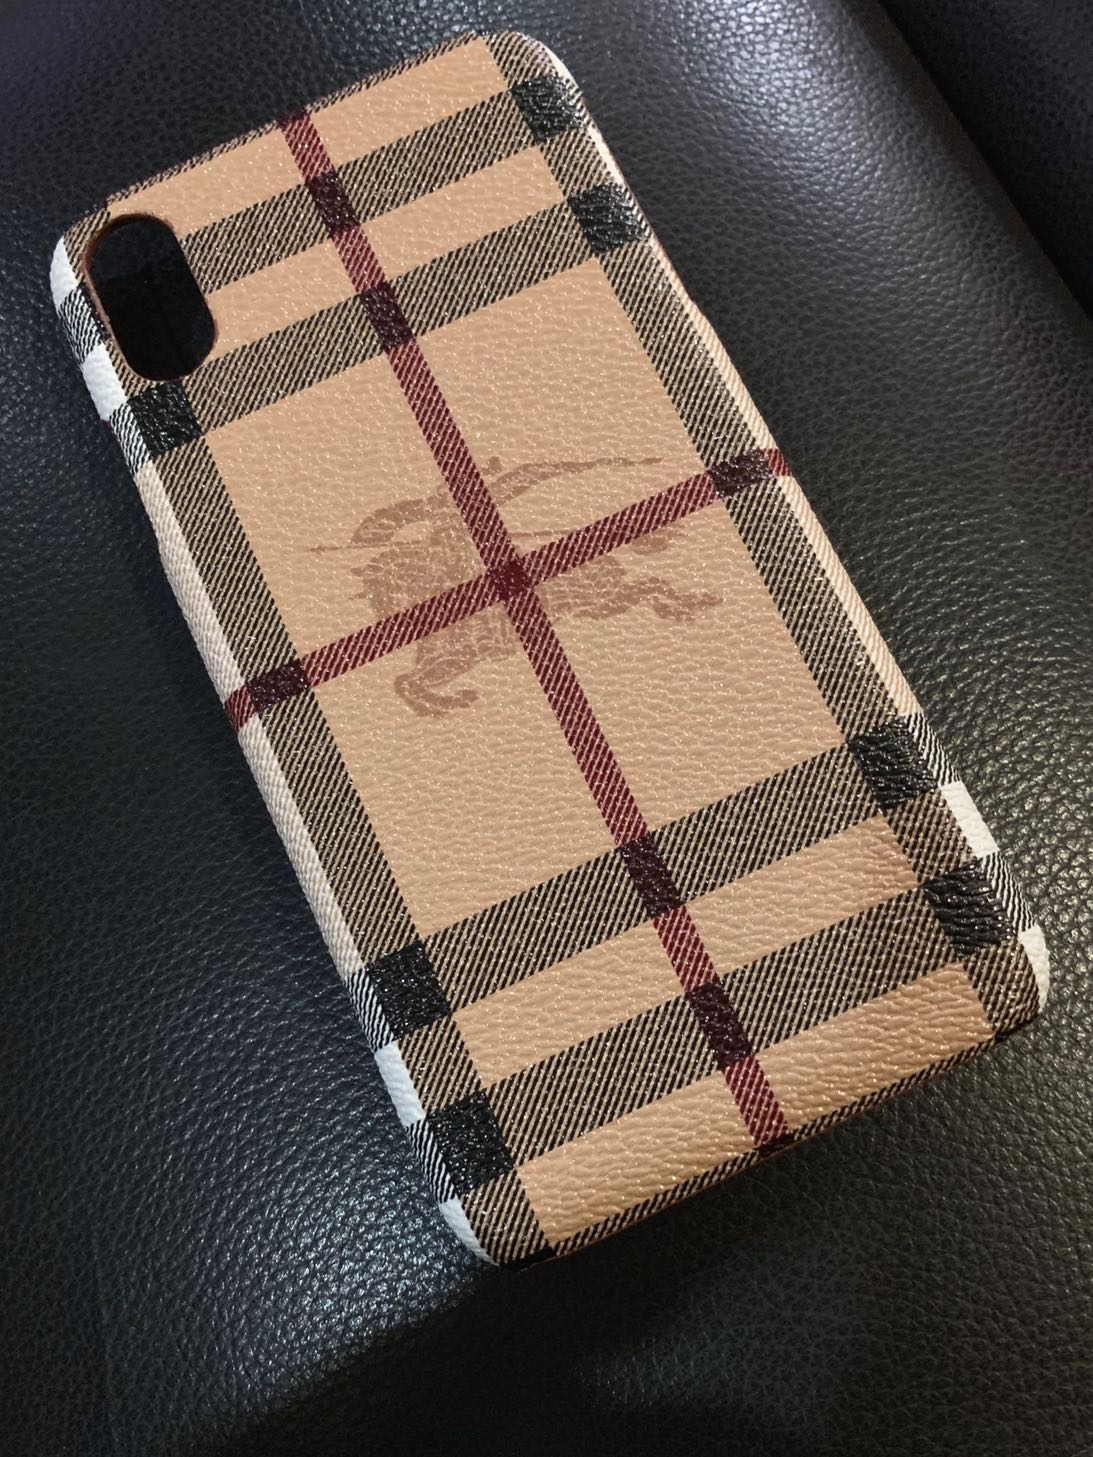 IPhone XS Max Burberry case , Mobile 